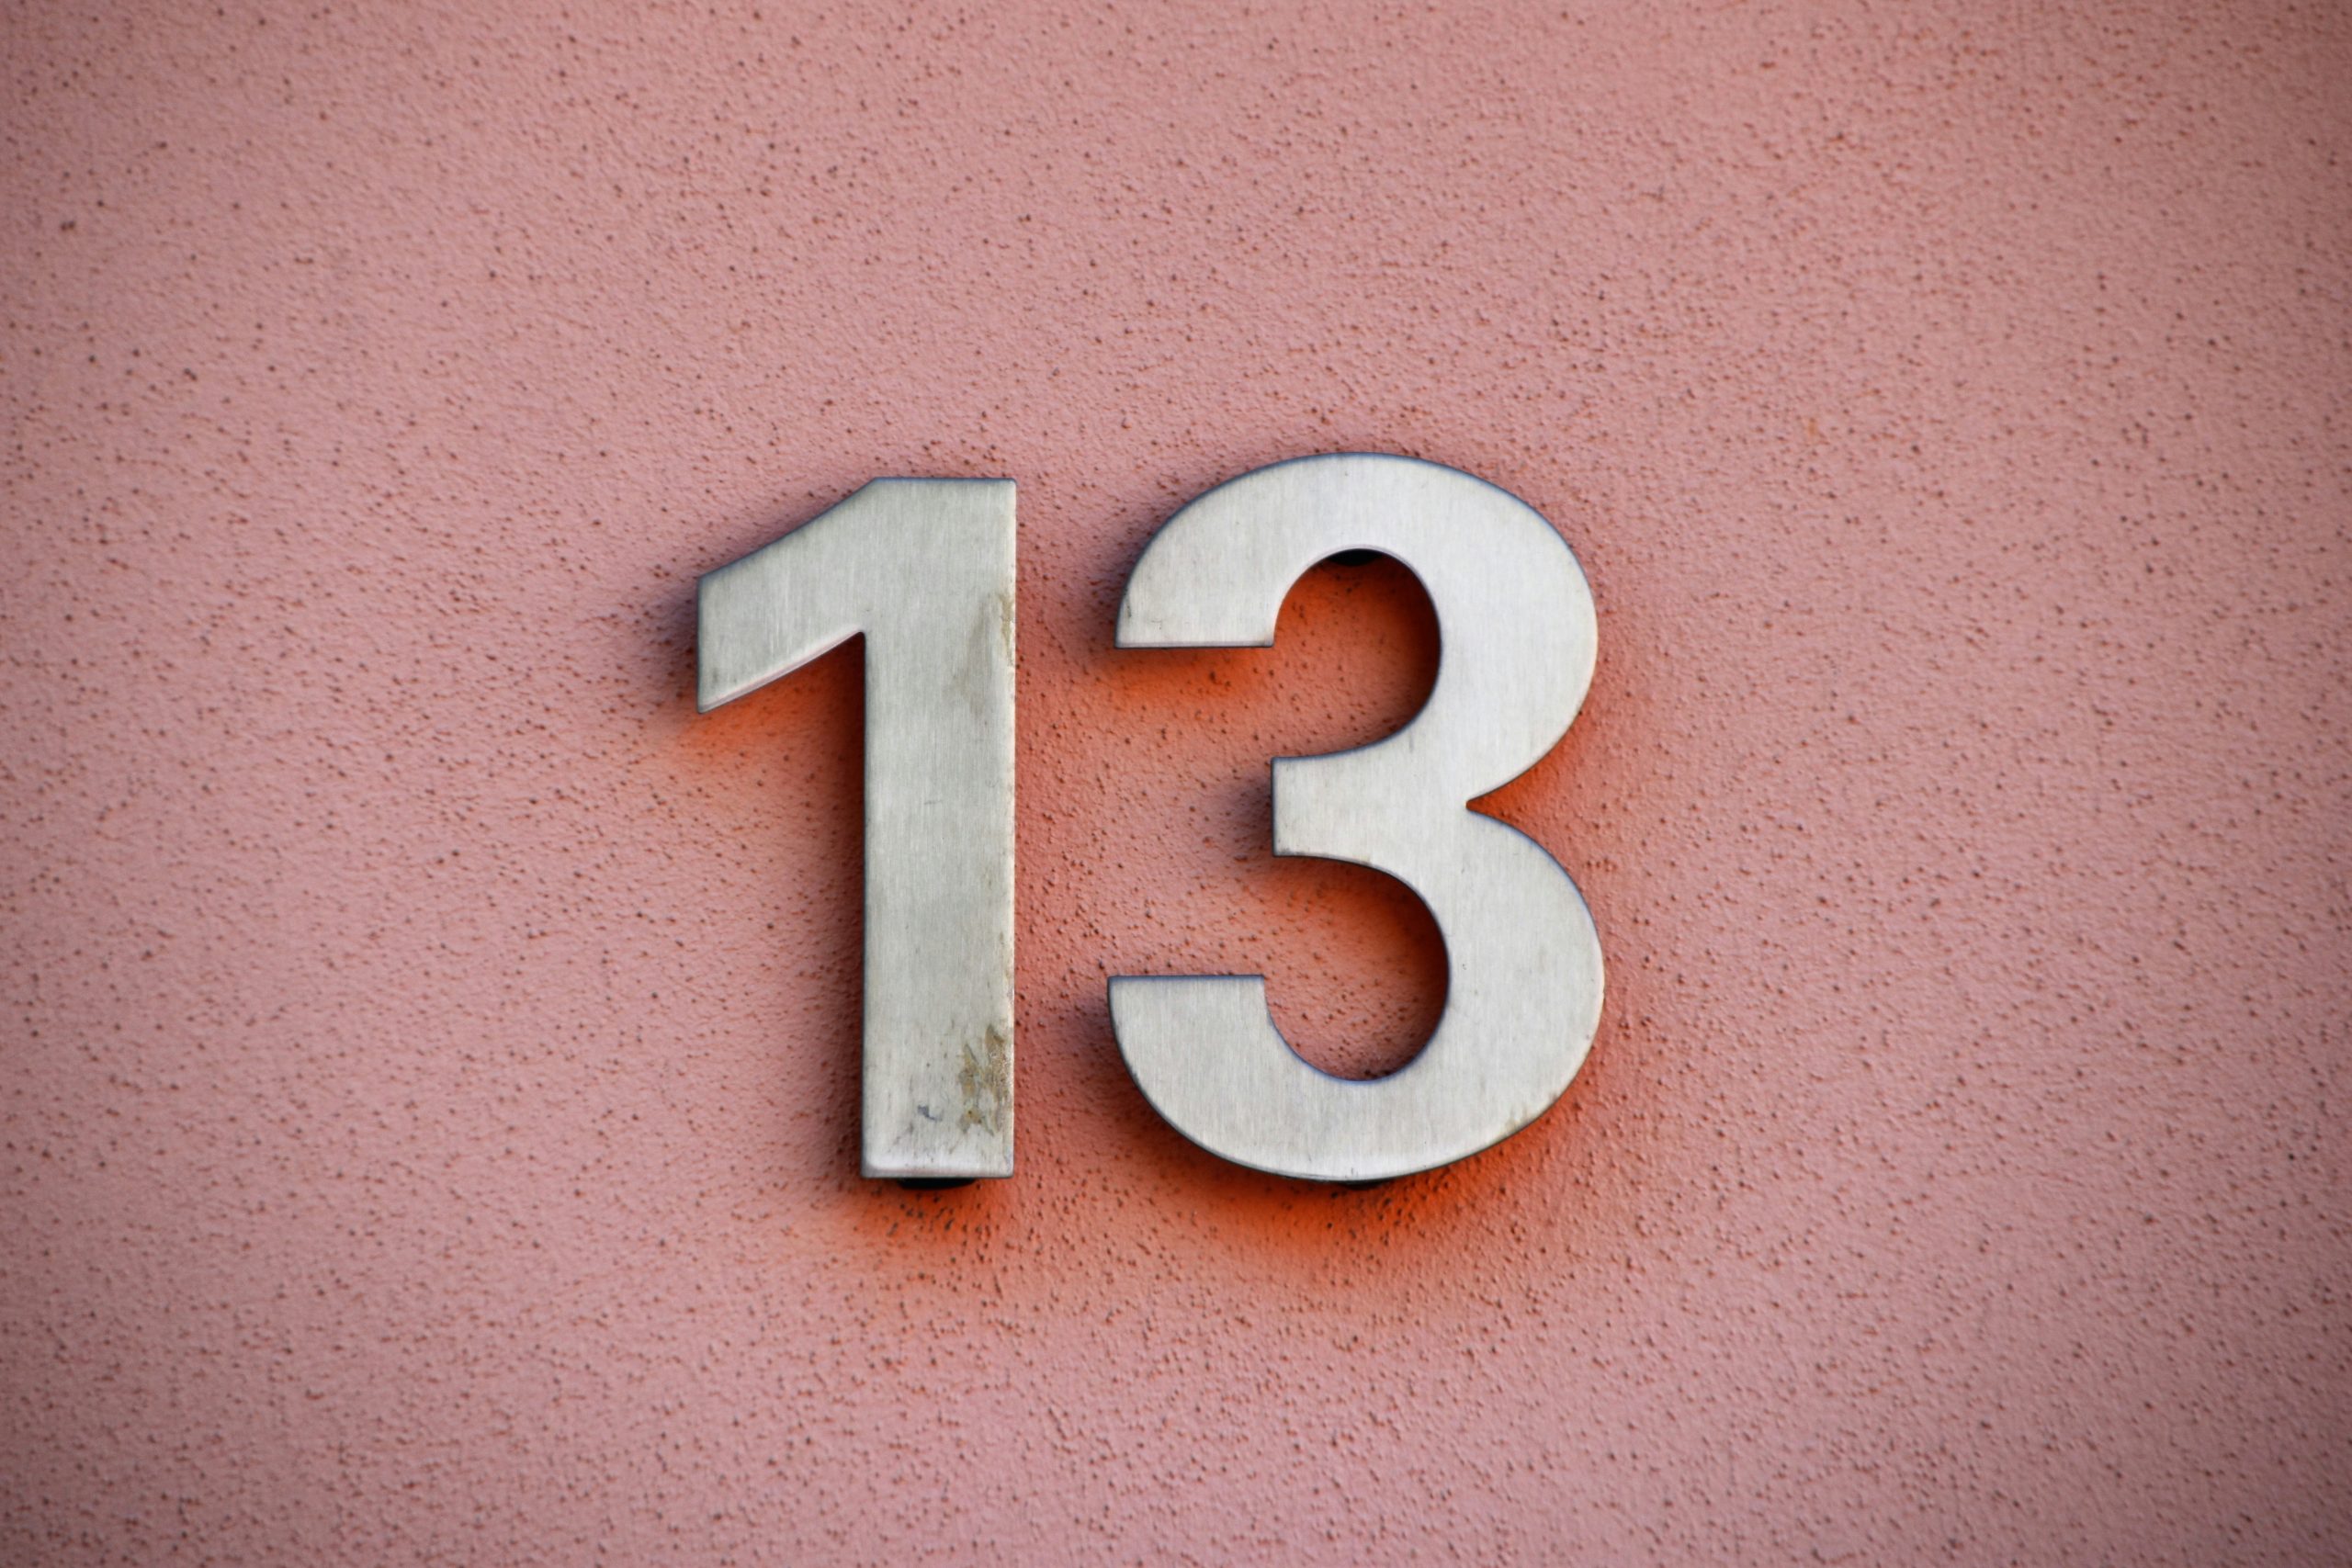 house number 13